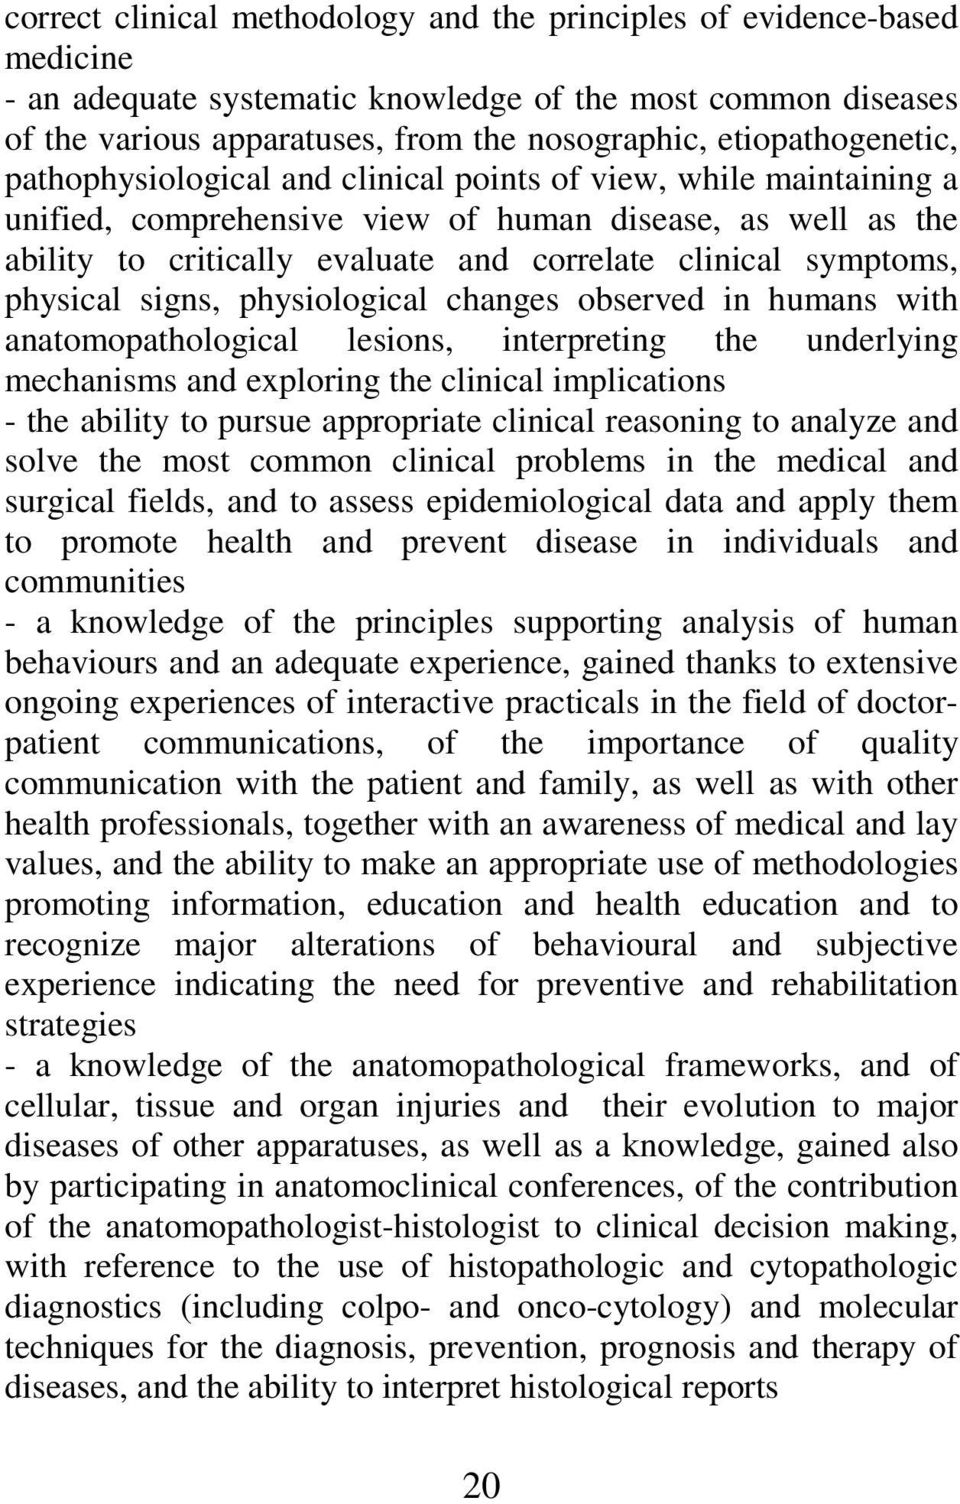 clinical symptoms, physical signs, physiological changes observed in humans with anatomopathological lesions, interpreting the underlying mechanisms and exploring the clinical implications - the